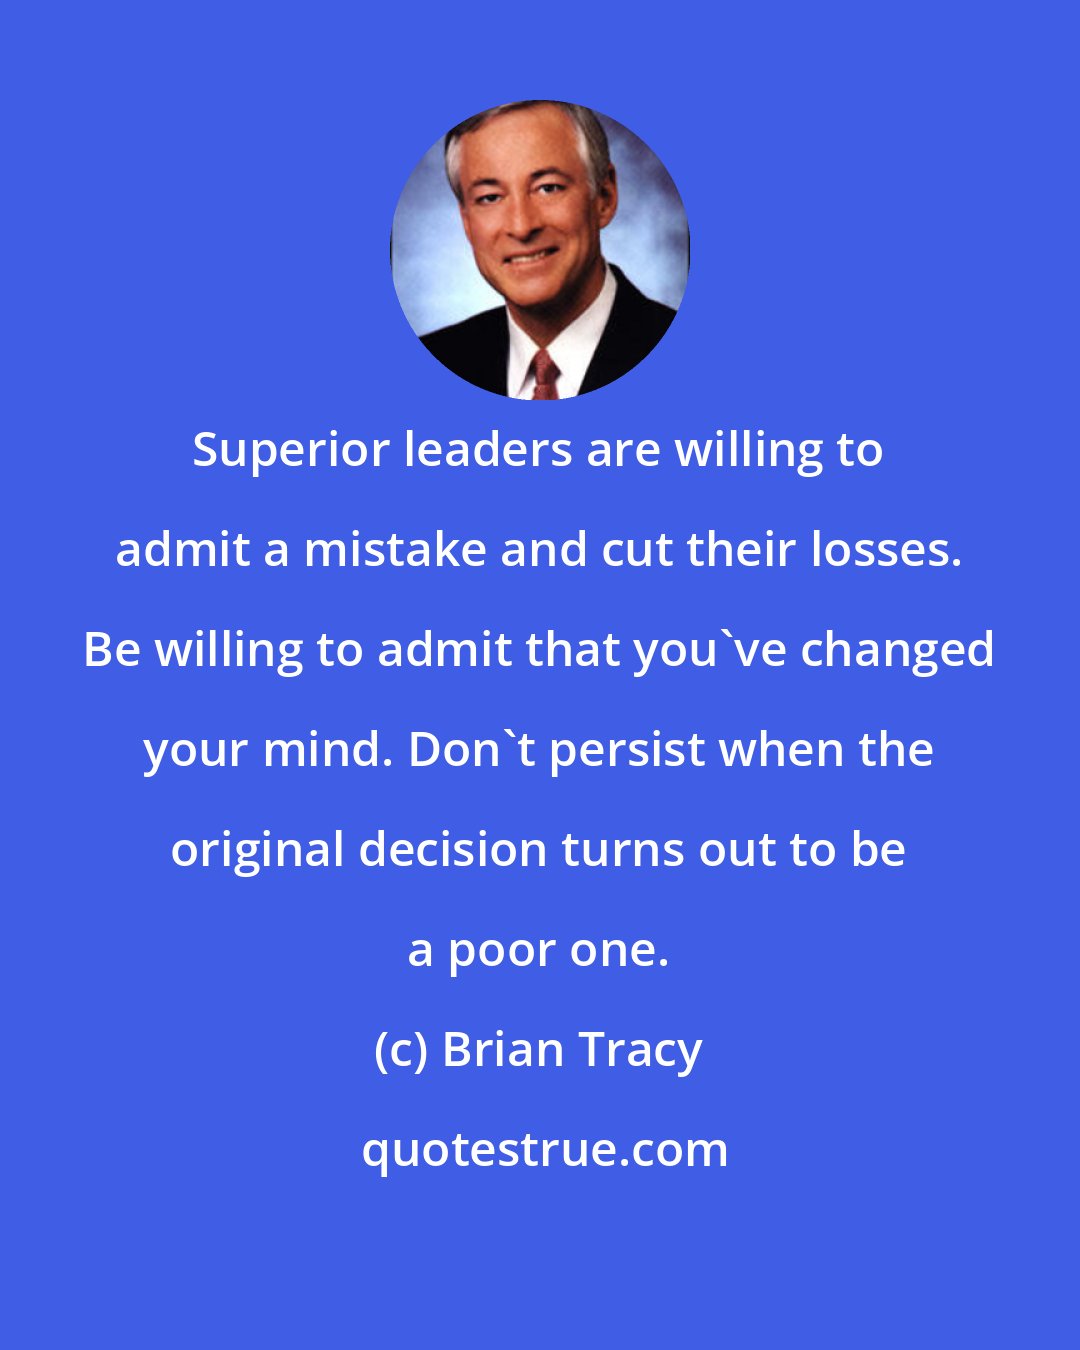 Brian Tracy: Superior leaders are willing to admit a mistake and cut their losses. Be willing to admit that you've changed your mind. Don't persist when the original decision turns out to be a poor one.